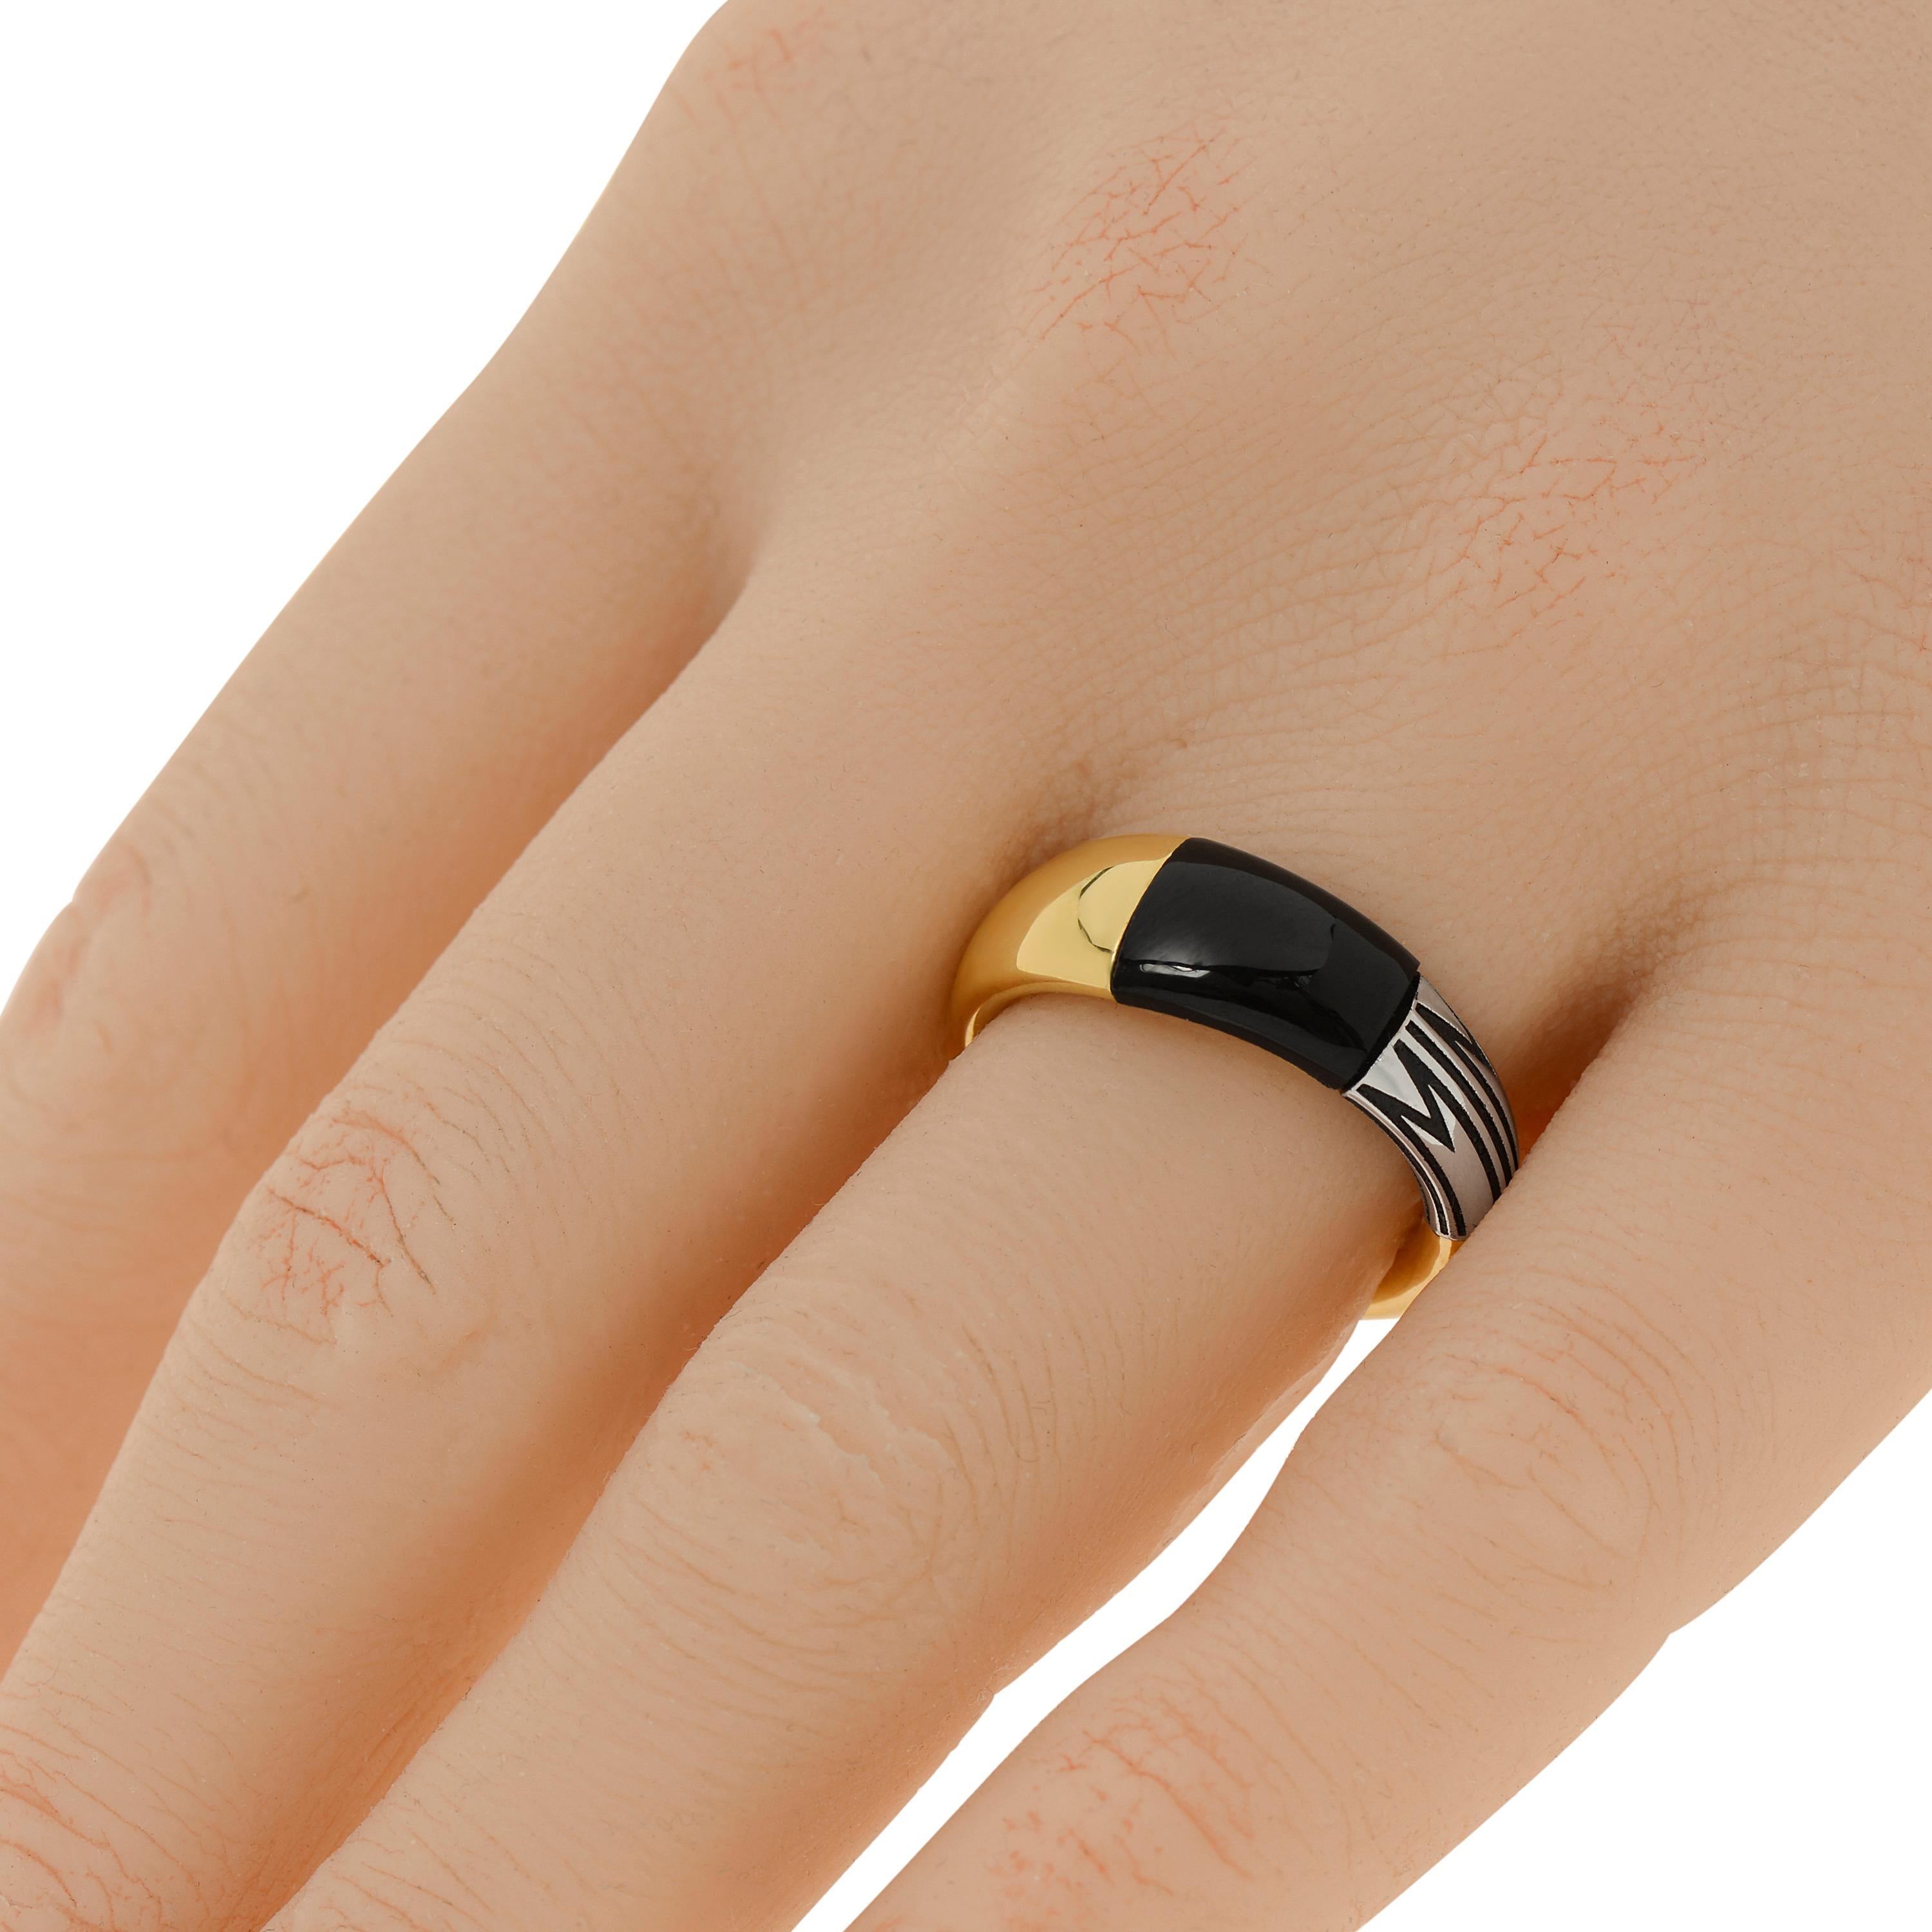 Mimi Milano 18K yellow gold and 18K white gold band ring features an elegant combination of two tone 18K Gold and Onyx. The ring size is 7 (54.4). The band width is 3.7mm - 7.7mm. The weight is 4.27g.
